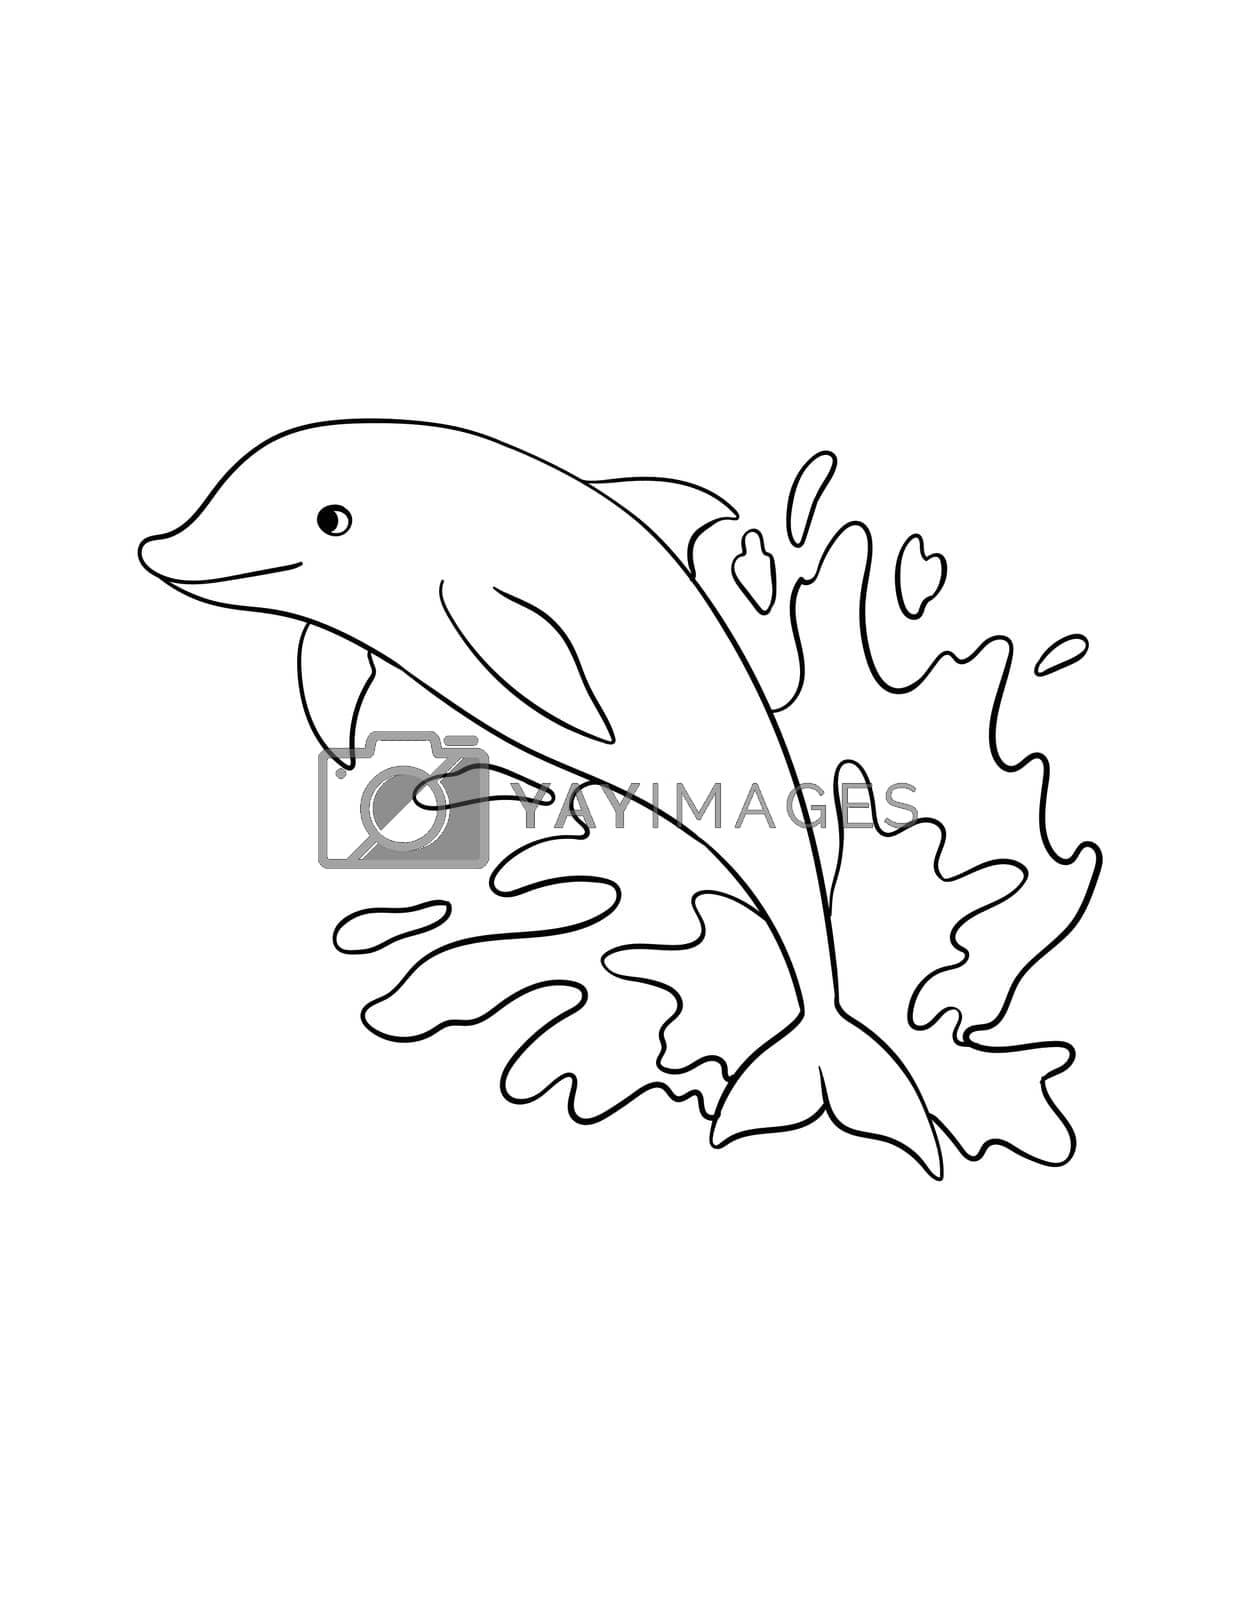 Royalty free image of Dolphin Isolated Coloring Page for Kids by abbydesign